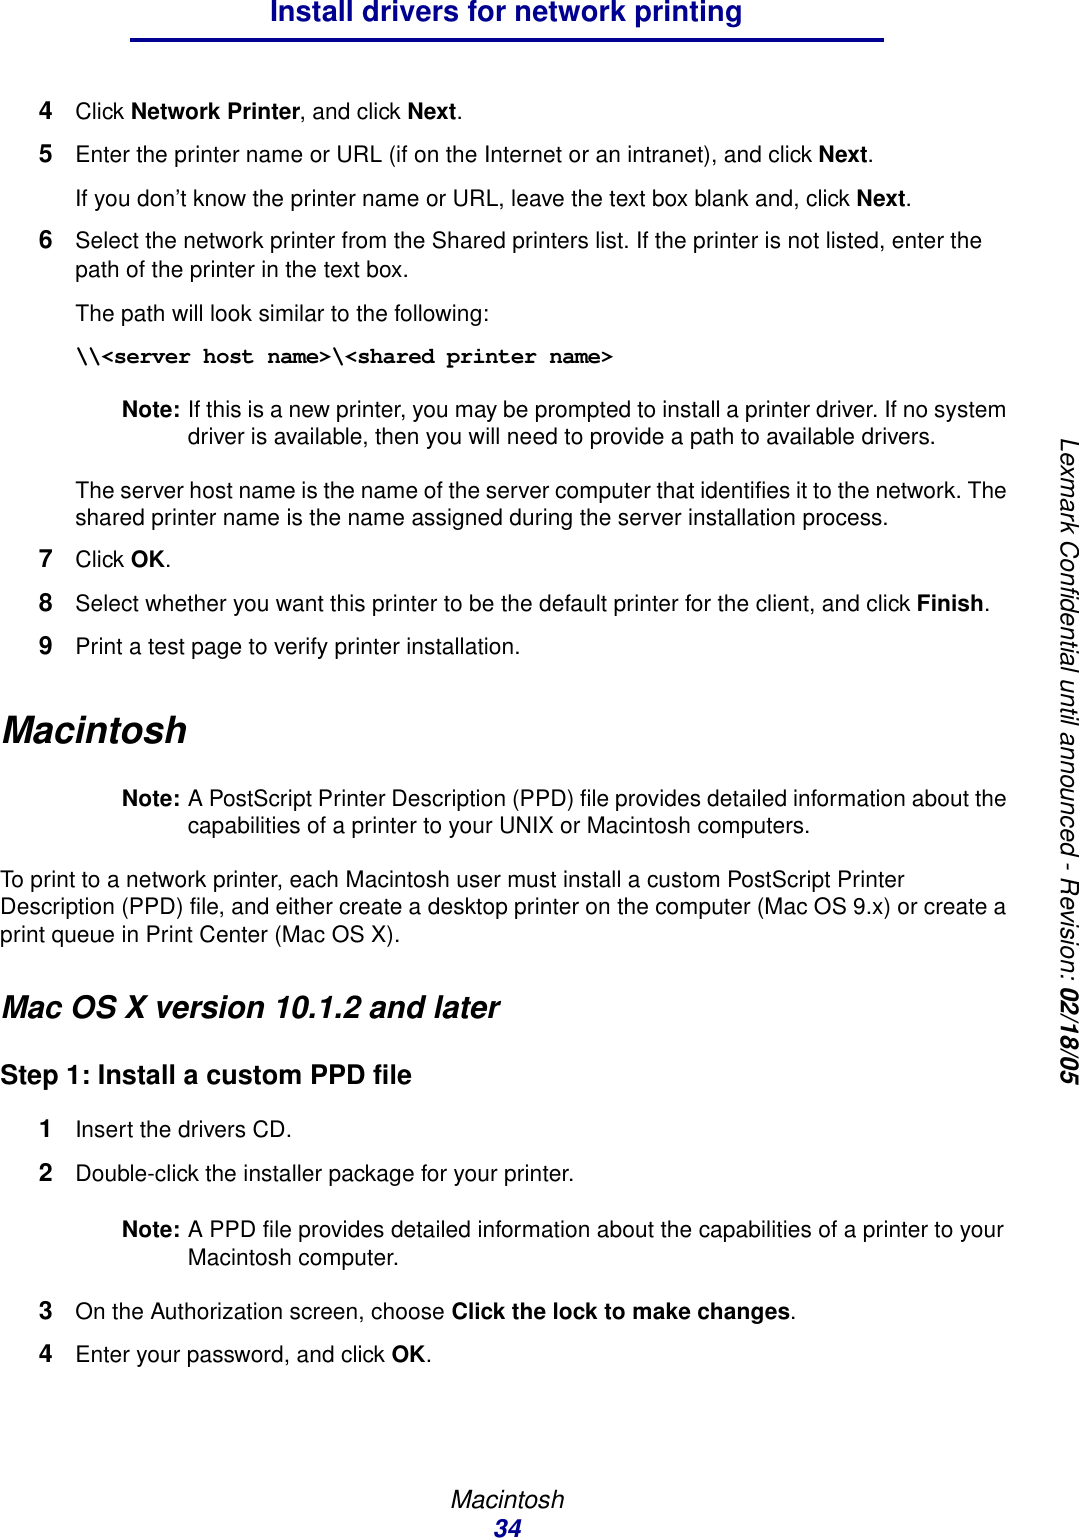 Macintosh34Install drivers for network printingLexmark Confidential until announced - Revision: 02/18/054Click Network Printer, and click Next.5Enter the printer name or URL (if on the Internet or an intranet), and click Next.If you don’t know the printer name or URL, leave the text box blank and, click Next.6Select the network printer from the Shared printers list. If the printer is not listed, enter the path of the printer in the text box. The path will look similar to the following:\\&lt;server host name&gt;\&lt;shared printer name&gt;Note: If this is a new printer, you may be prompted to install a printer driver. If no system driver is available, then you will need to provide a path to available drivers.The server host name is the name of the server computer that identifies it to the network. The shared printer name is the name assigned during the server installation process.7Click OK.8Select whether you want this printer to be the default printer for the client, and click Finish.9Print a test page to verify printer installation.MacintoshNote: A PostScript Printer Description (PPD) file provides detailed information about the capabilities of a printer to your UNIX or Macintosh computers.To print to a network printer, each Macintosh user must install a custom PostScript Printer Description (PPD) file, and either create a desktop printer on the computer (Mac OS 9.x) or create a print queue in Print Center (Mac OS X).Mac OS X version 10.1.2 and laterStep 1: Install a custom PPD file1Insert the drivers CD.2Double-click the installer package for your printer.Note: A PPD file provides detailed information about the capabilities of a printer to your Macintosh computer.3On the Authorization screen, choose Click the lock to make changes.4Enter your password, and click OK.